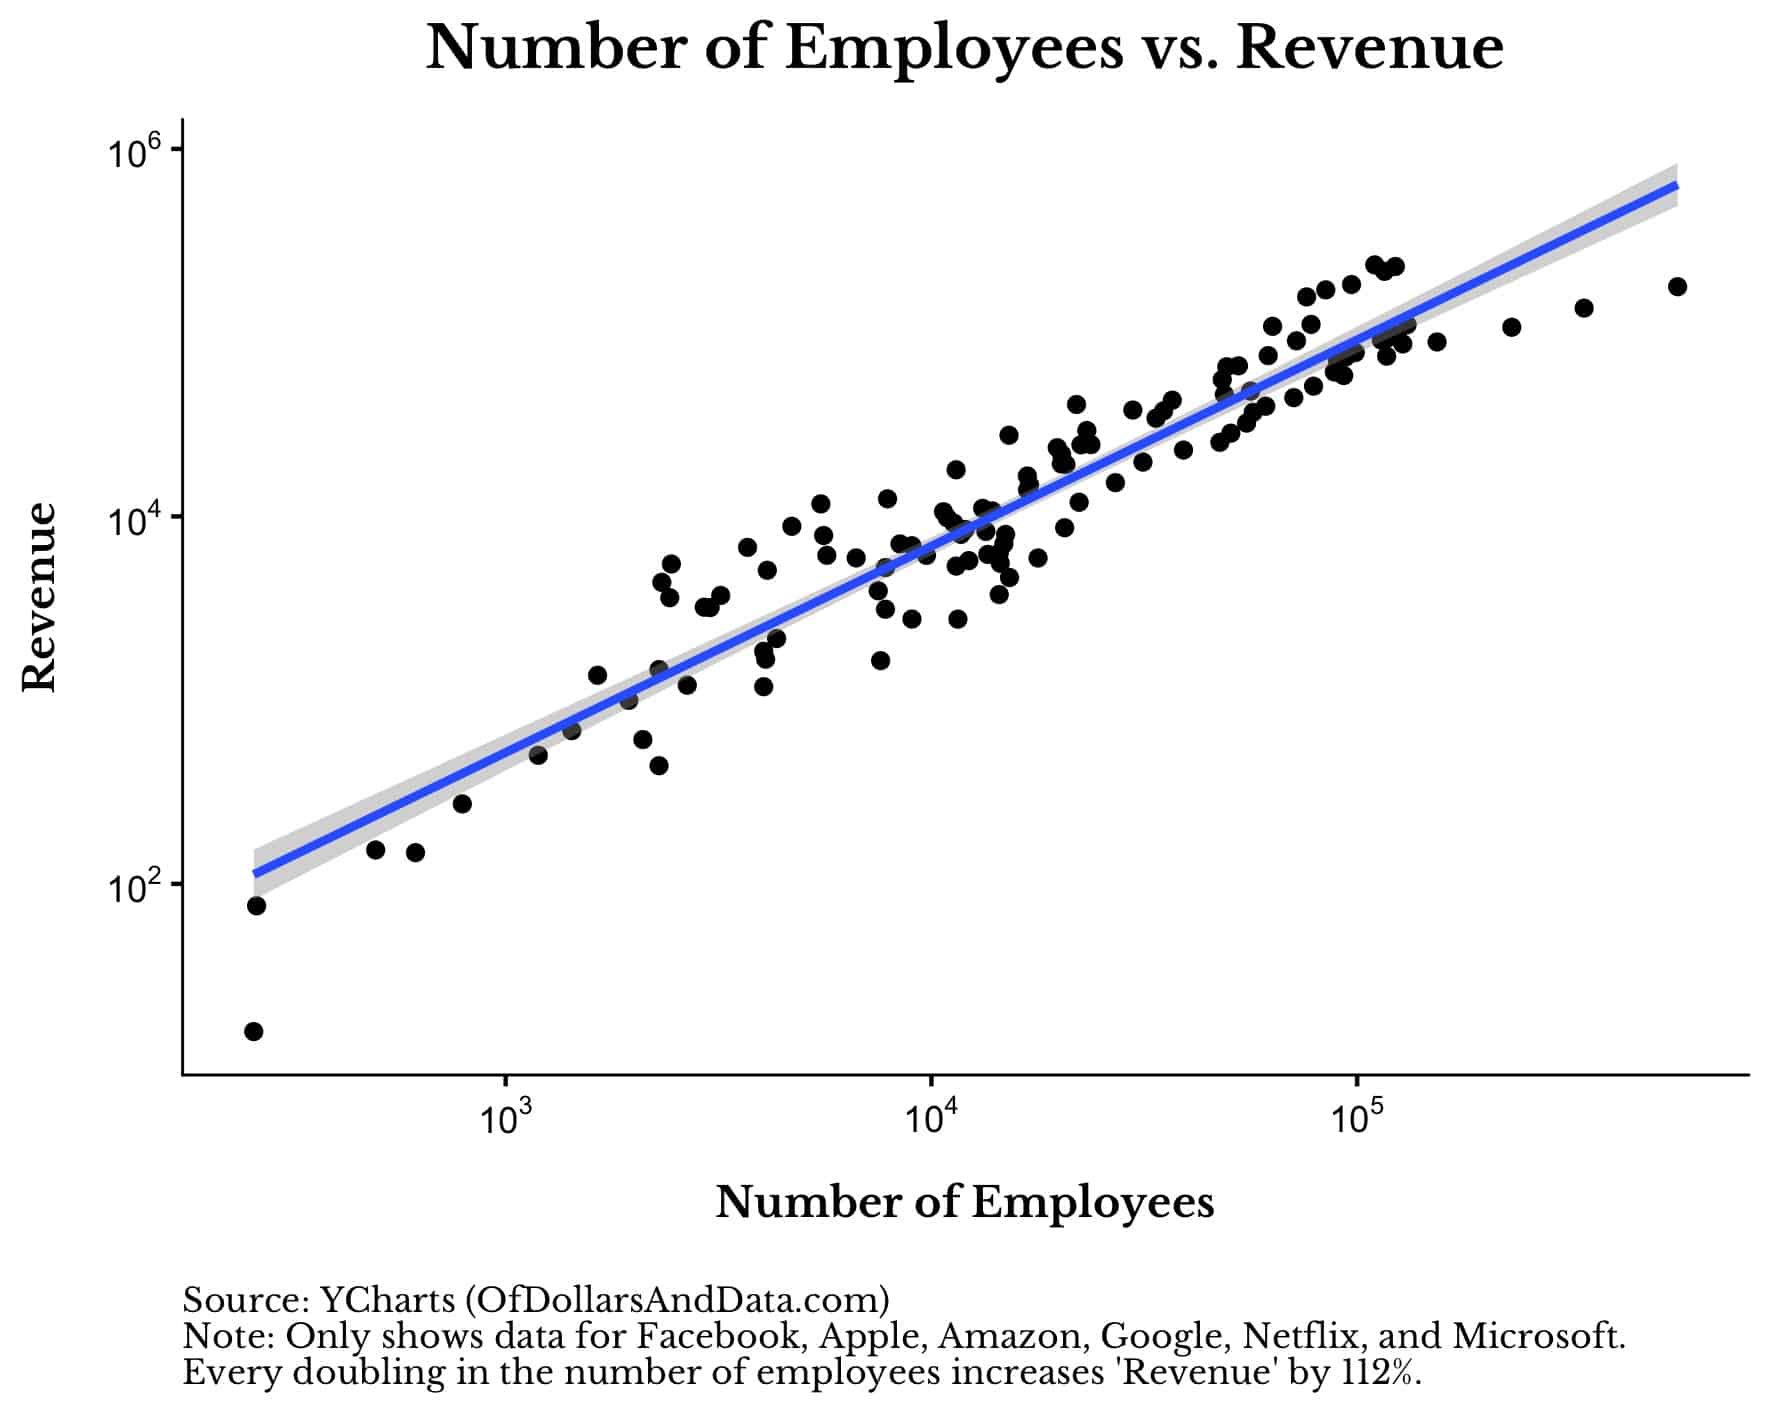 Number of employees vs revenue for the FAANG companies.